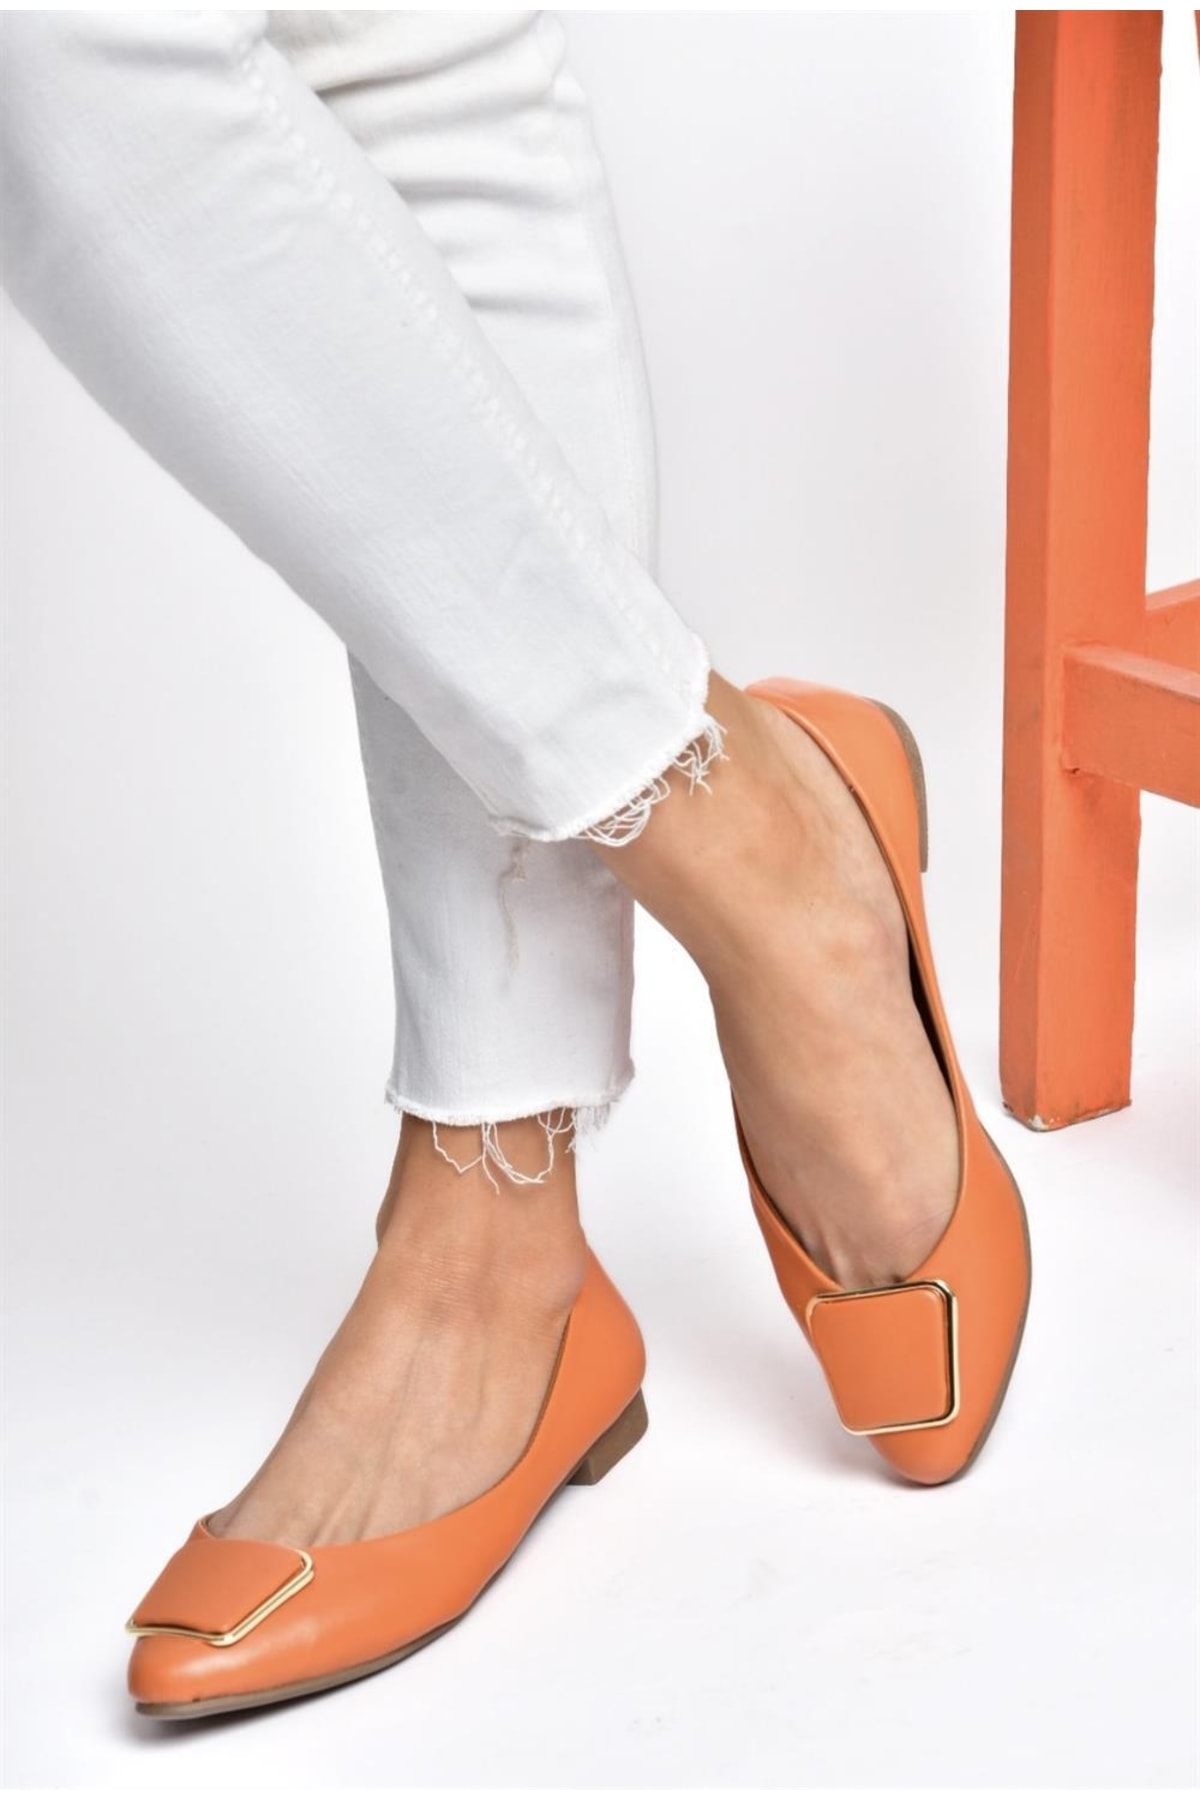 Fox Shoes P726776309 Orange Women's Flats with Buckles Accessory